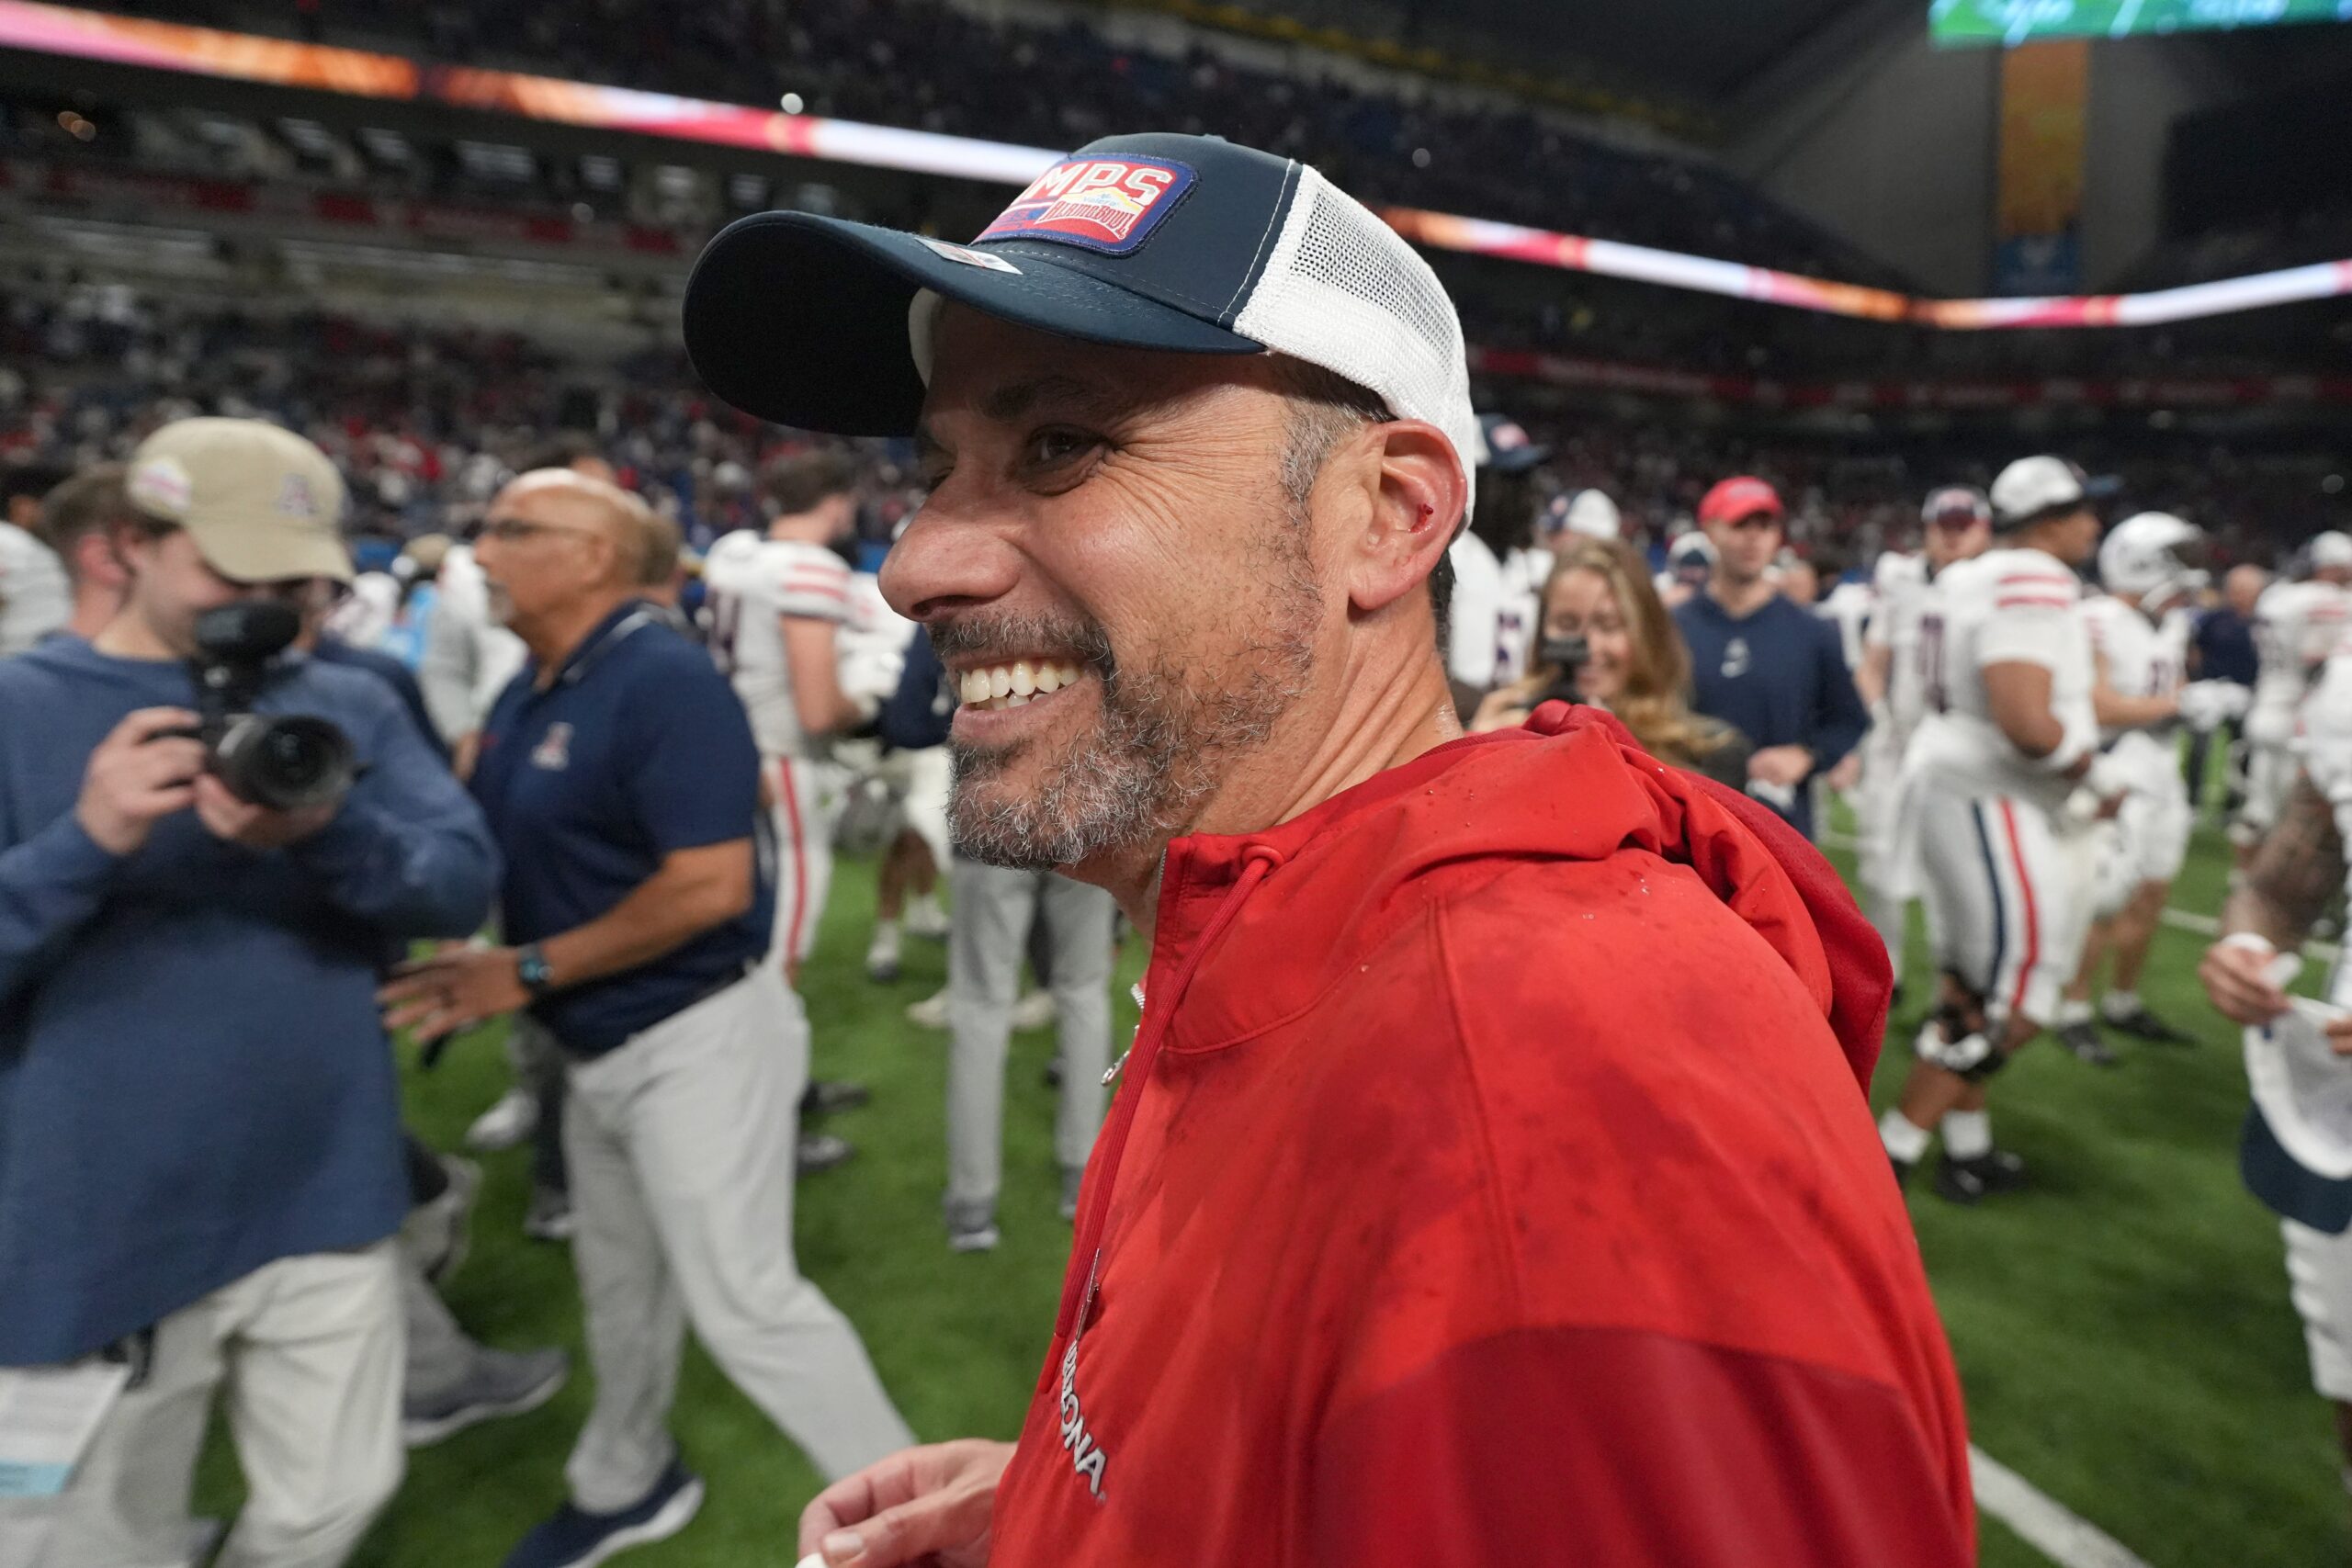 Washington has found its next head coach in Jedd Fisch. Here's how the hiring went down and what to expect going forward on Montlake.